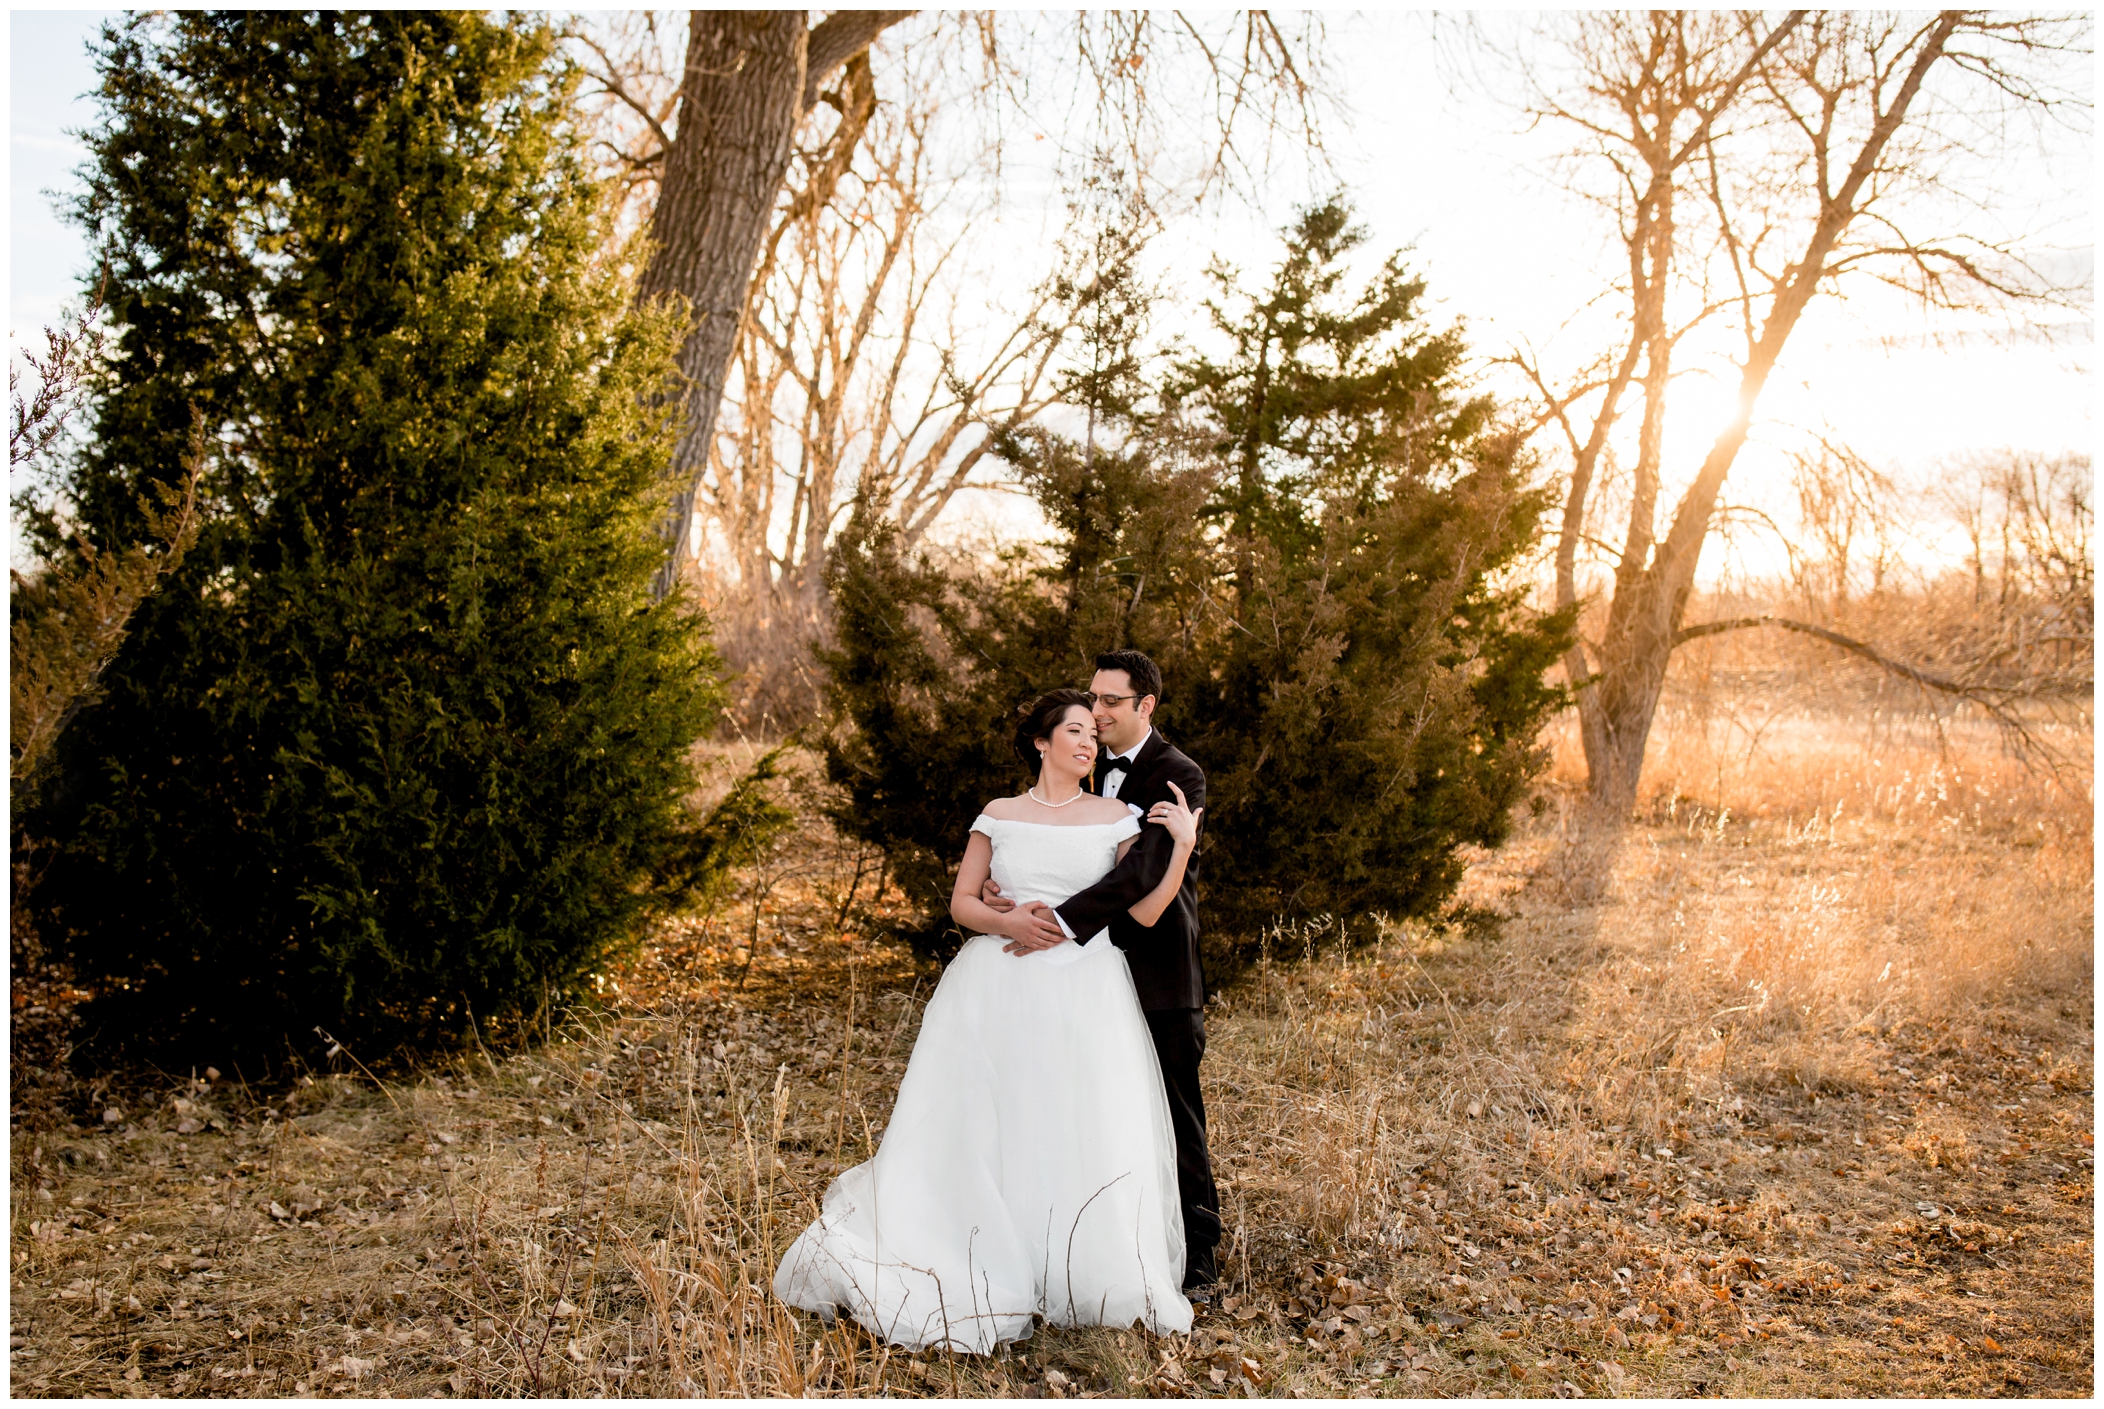 Westminster Colorado wedding photos at Immaculate Heart of Mary by Denver photographer Plum Pretty Photography